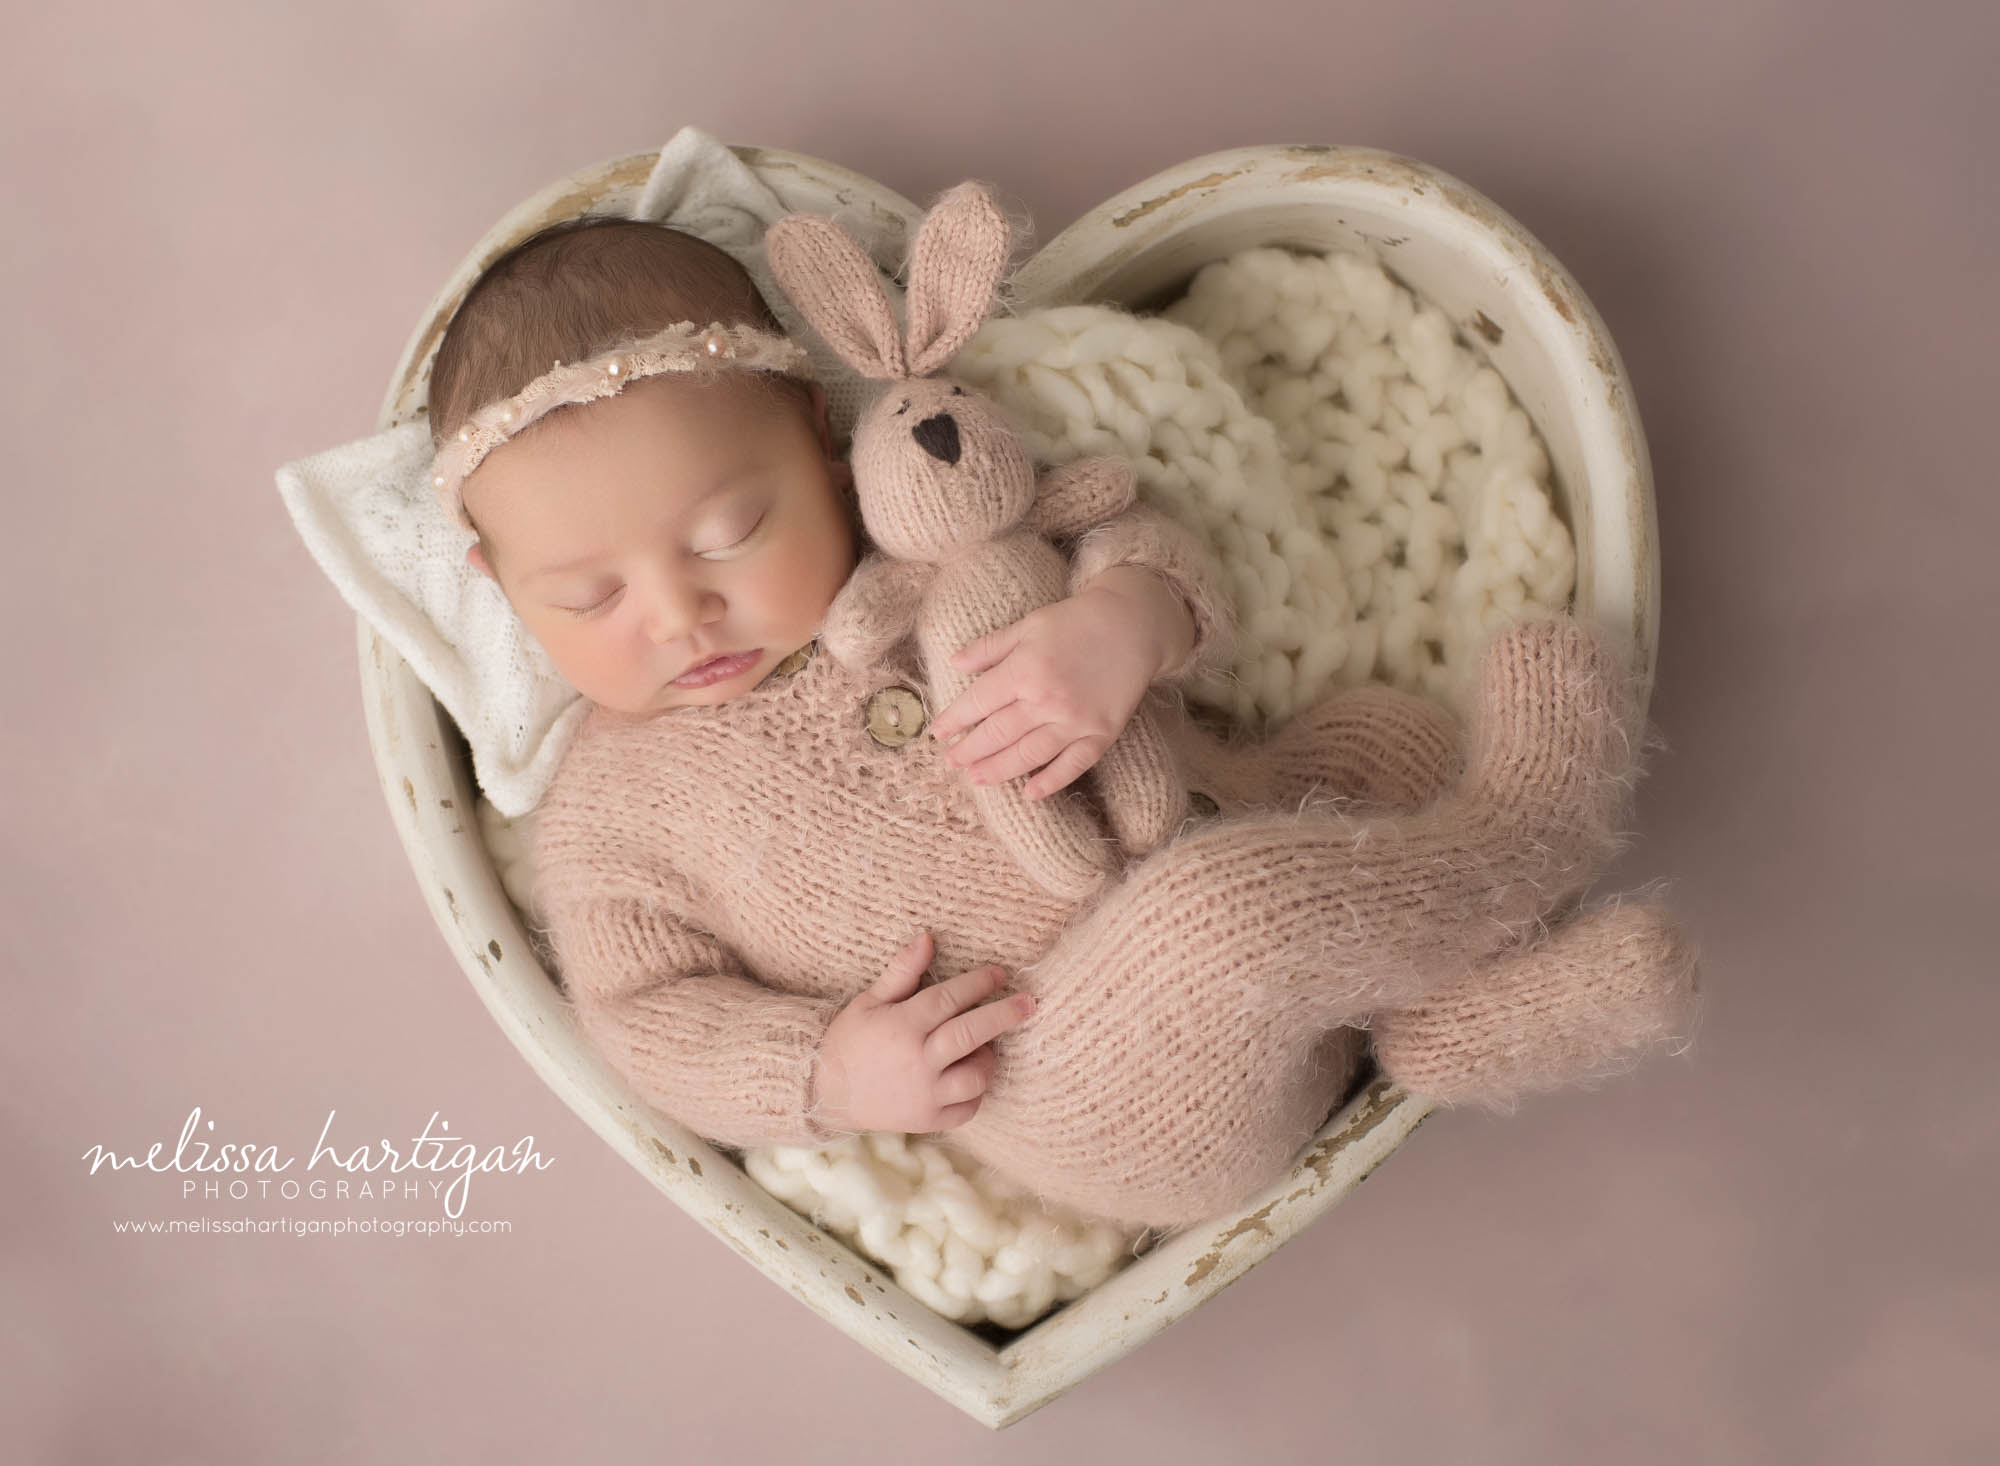 newborn baby girl posed in cream wooden heart shaped prop wearing pink knitted footed sleeper holding knitted bunny prop